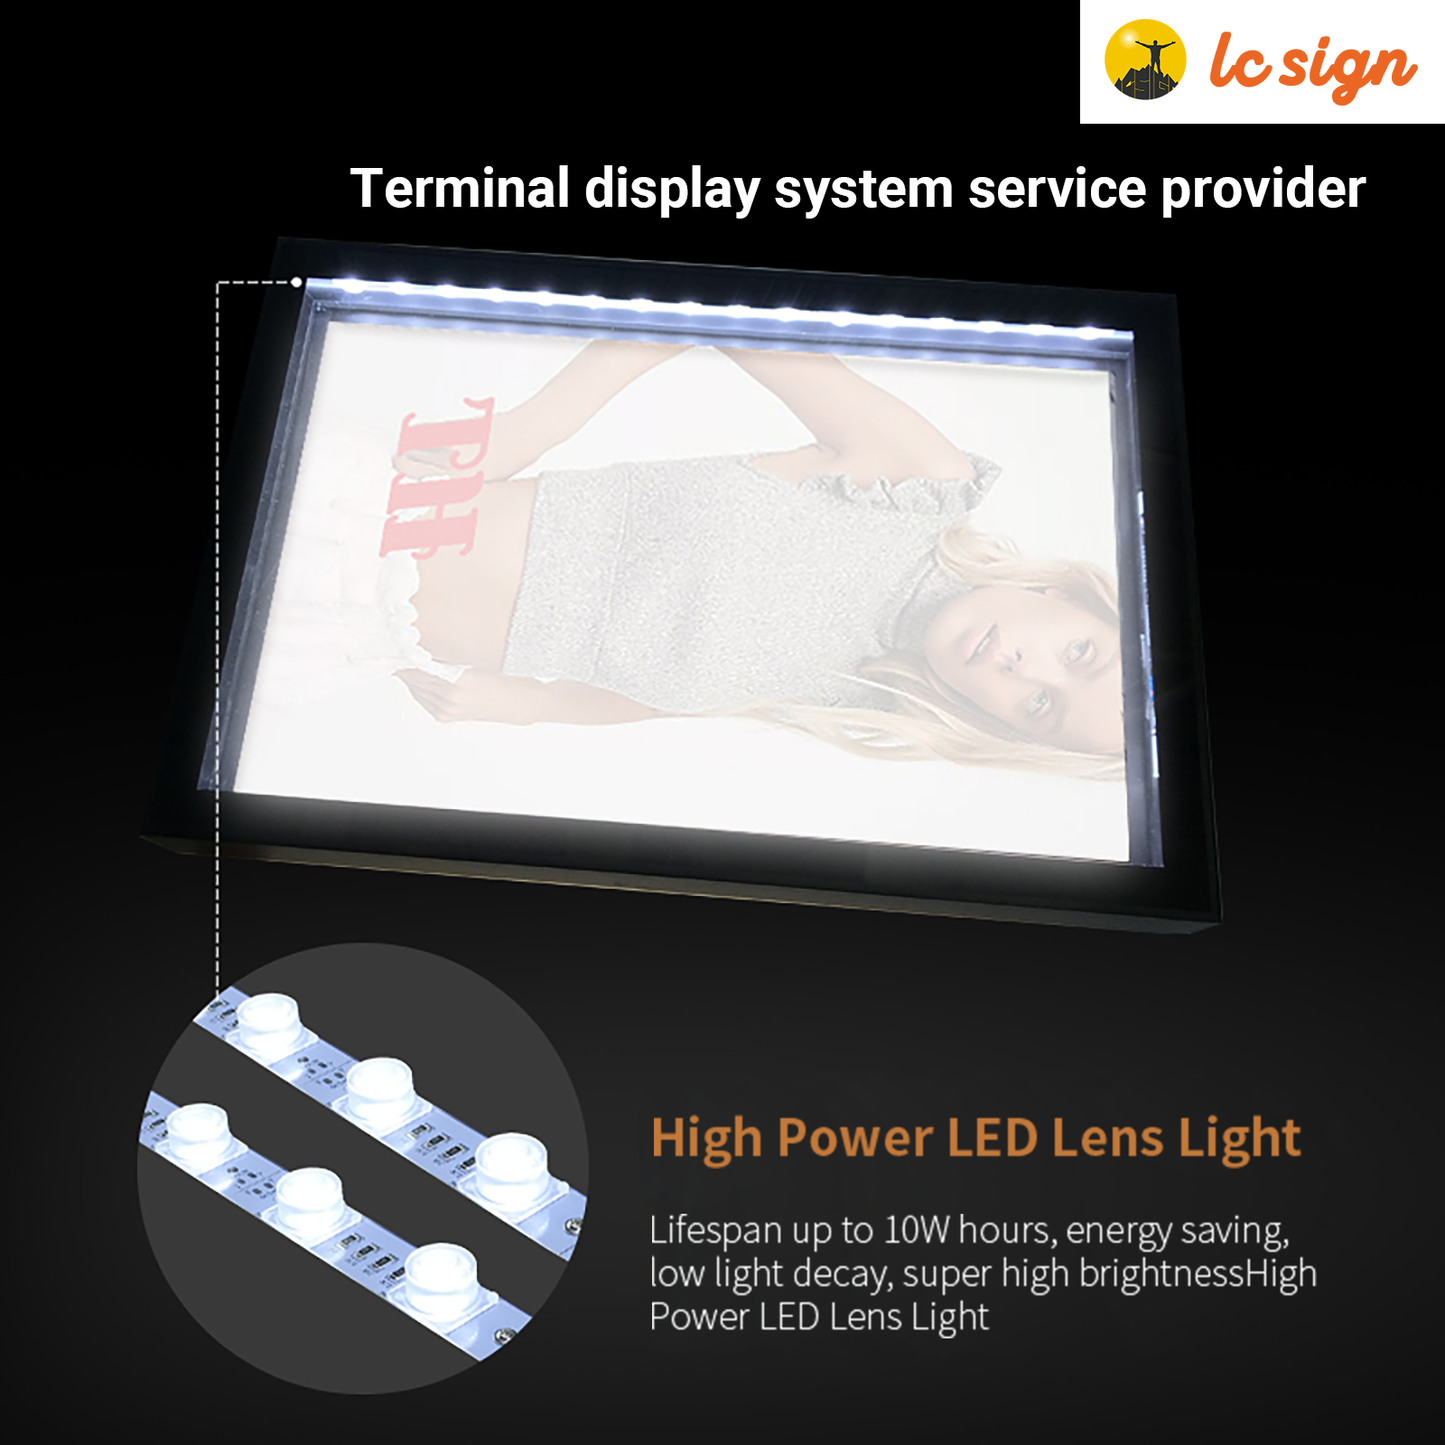 Indoor & Outdoor Use - Side-mounted Double Side Illuminated Advertising Light Box Sign